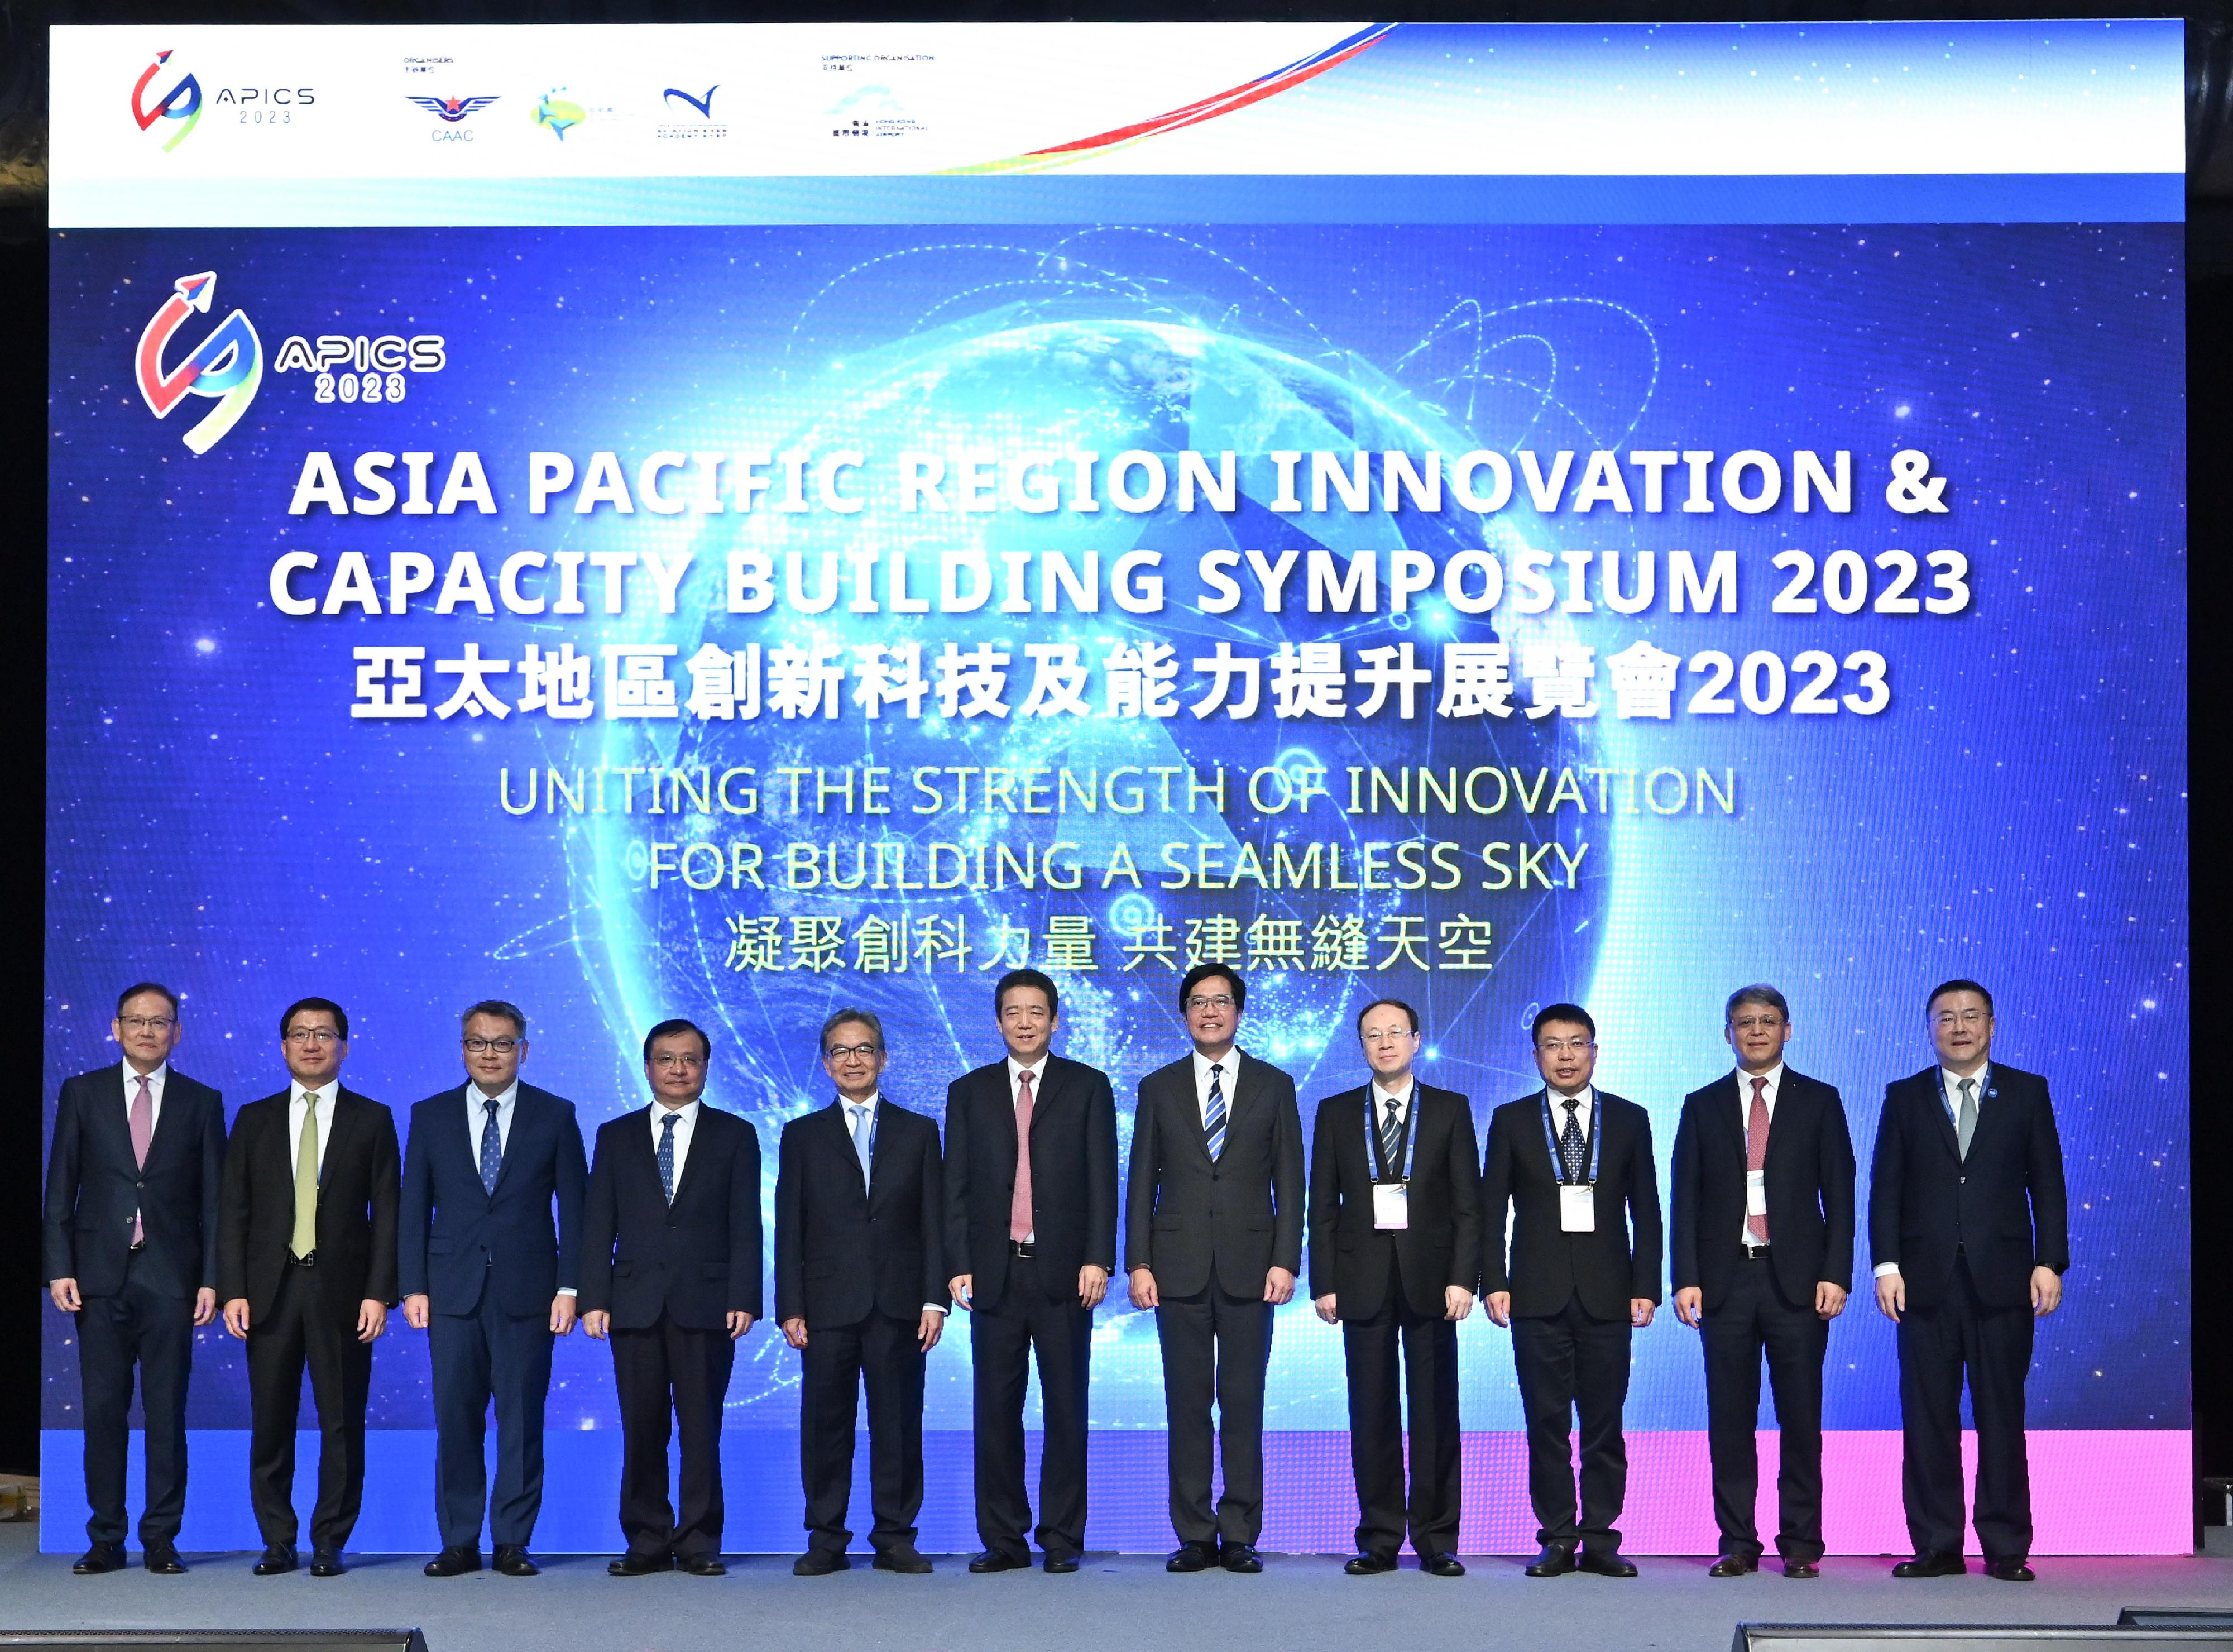 The Asia Pacific Region Innovation & Capacity Building Symposium 2023 (APICS 2023) commenced today (December 14). Photo shows the Deputy Financial Secretary, Mr Michael Wong (fifth right); Deputy Administrator of Civil Aviation Administration of China (CAAC) Mr Cui Xiaofeng (sixth left); the Director of the Bureau III of the Hong Kong and Macao Affairs Office of the State Council, Mr Wu Wei (fourth right); Deputy Commissioner of the Office of the Commissioner of the Ministry of Foreign Affairs of the People's Republic of China in the Hong Kong Special Administrative Region (HKSAR) Mr Fang Jianming (fourth left); Deputy Director-General Development of Economic Affairs of the Liaison Office of the Central People's Government in the HKSAR Mr Lyu Feng (third right); the Chief Engineer of the CAAC, Mr Yin Shijun (second right); the Chairman of the Airport Authority Hong Kong (AAHK), Mr Jack So (fifth left); the Director-General of the Hong Kong Civil Aviation Department, Mr Victor Liu (third left); the Chief Executive Officer of the AAHK, Mr Fred Lam (second left); the President of the Hong Kong International Aviation Academy, Mr Simon Li (first left); the International Civil Aviation Organization Asia Pacific Regional Director, Mr Ma Tao (first right), officiating at the APICS 2023 opening ceremony.
